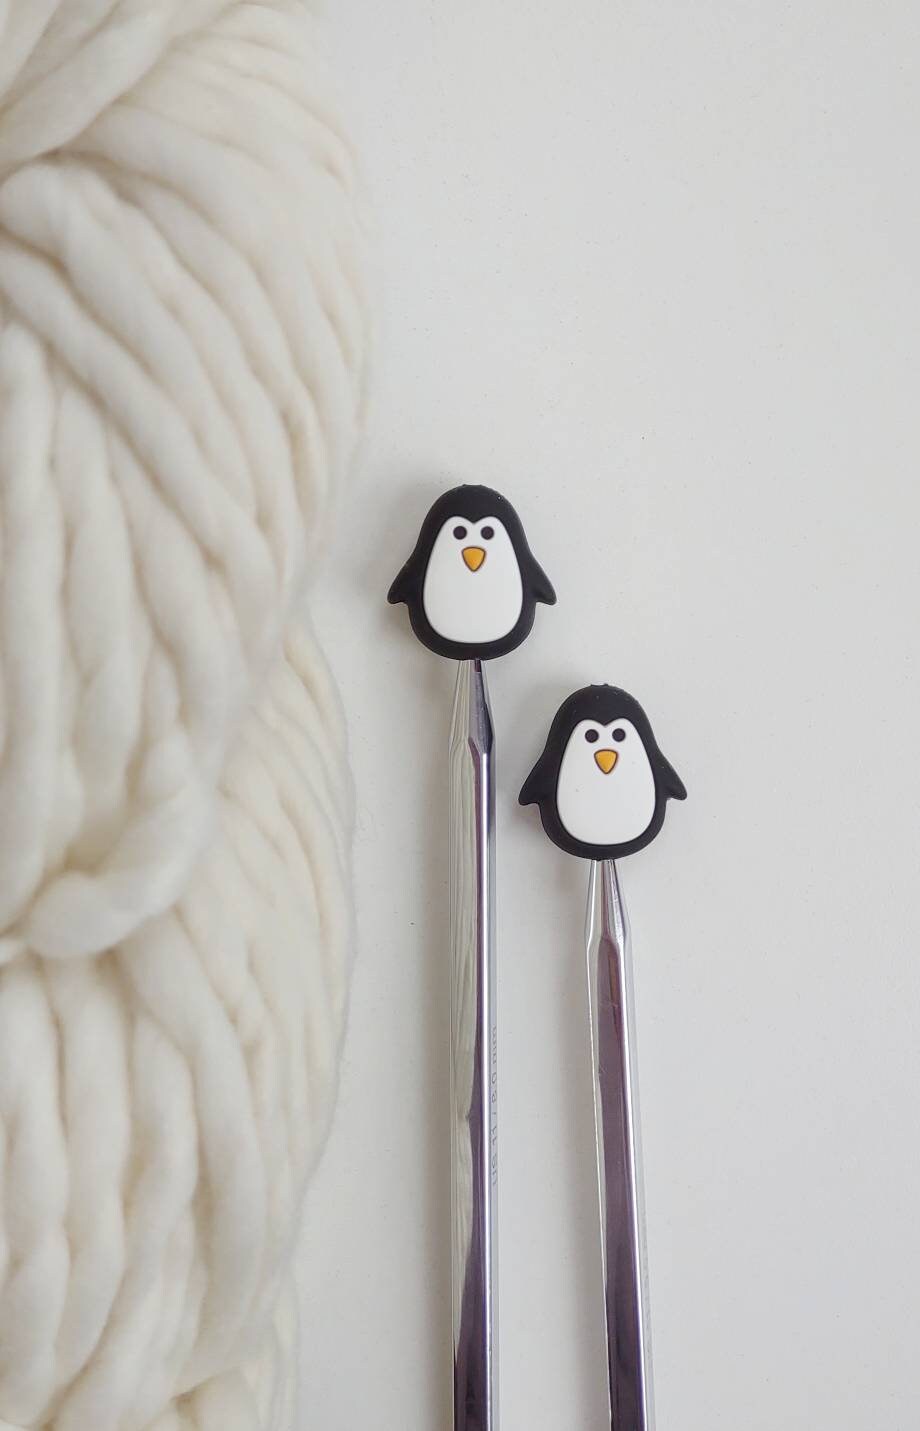 Penguin Knitting Needle Stitch Stoppers. Needle Protectors. Knitting Needle Stoppers. Knitting Notions, Accessories, Supplies, Tools.